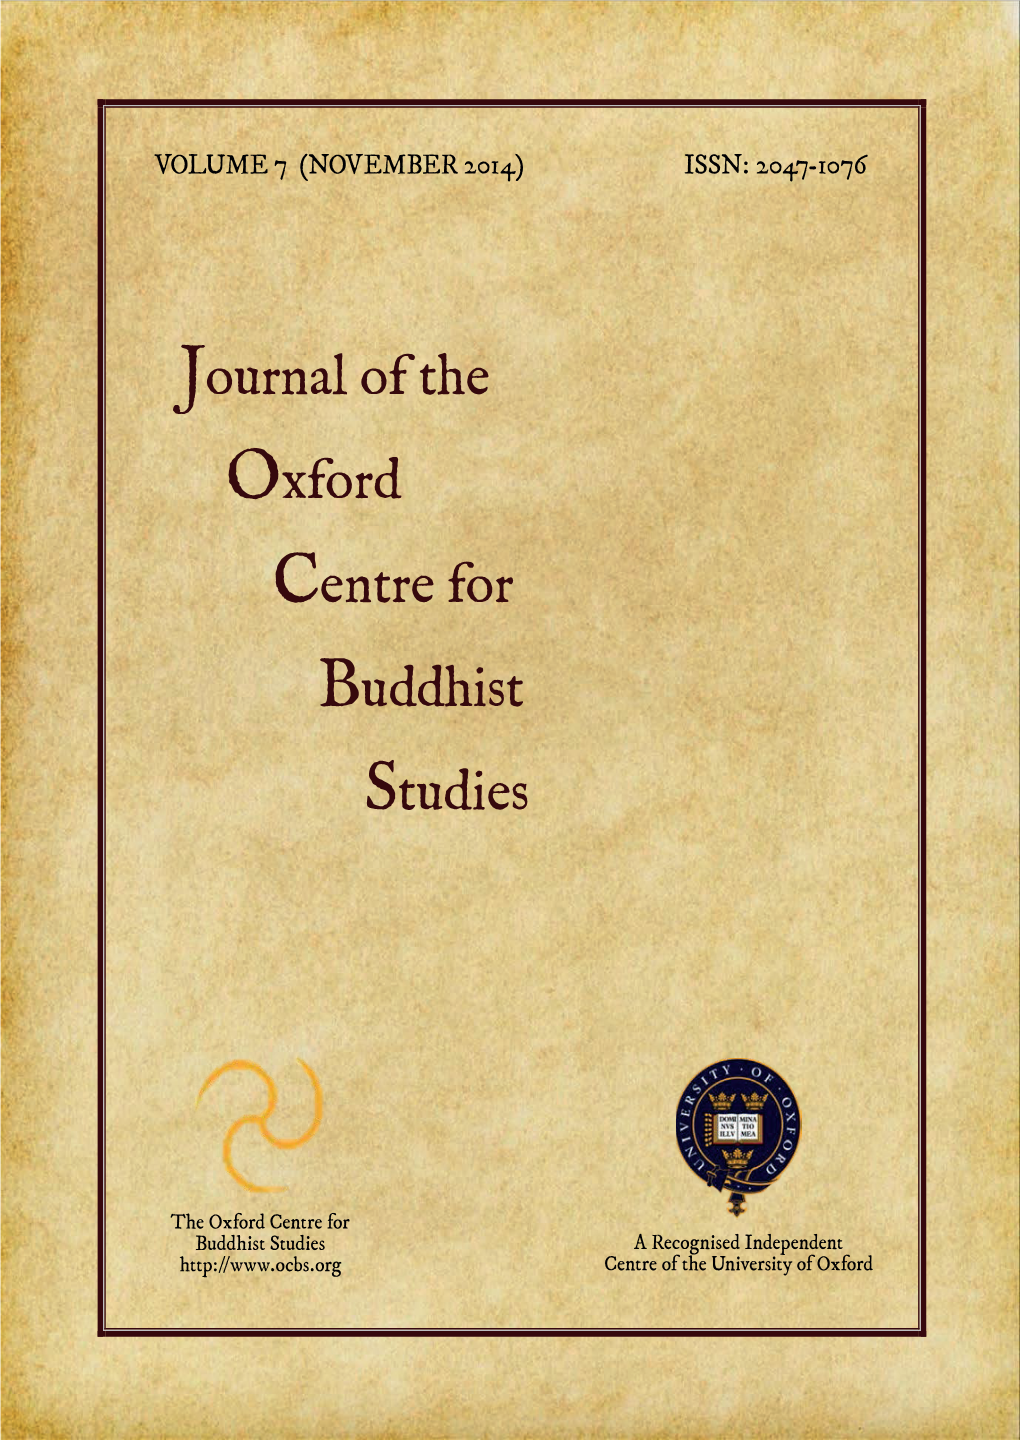 Journal of the Oxford Centre for Buddhist Studies, Vol. 7, November 2014